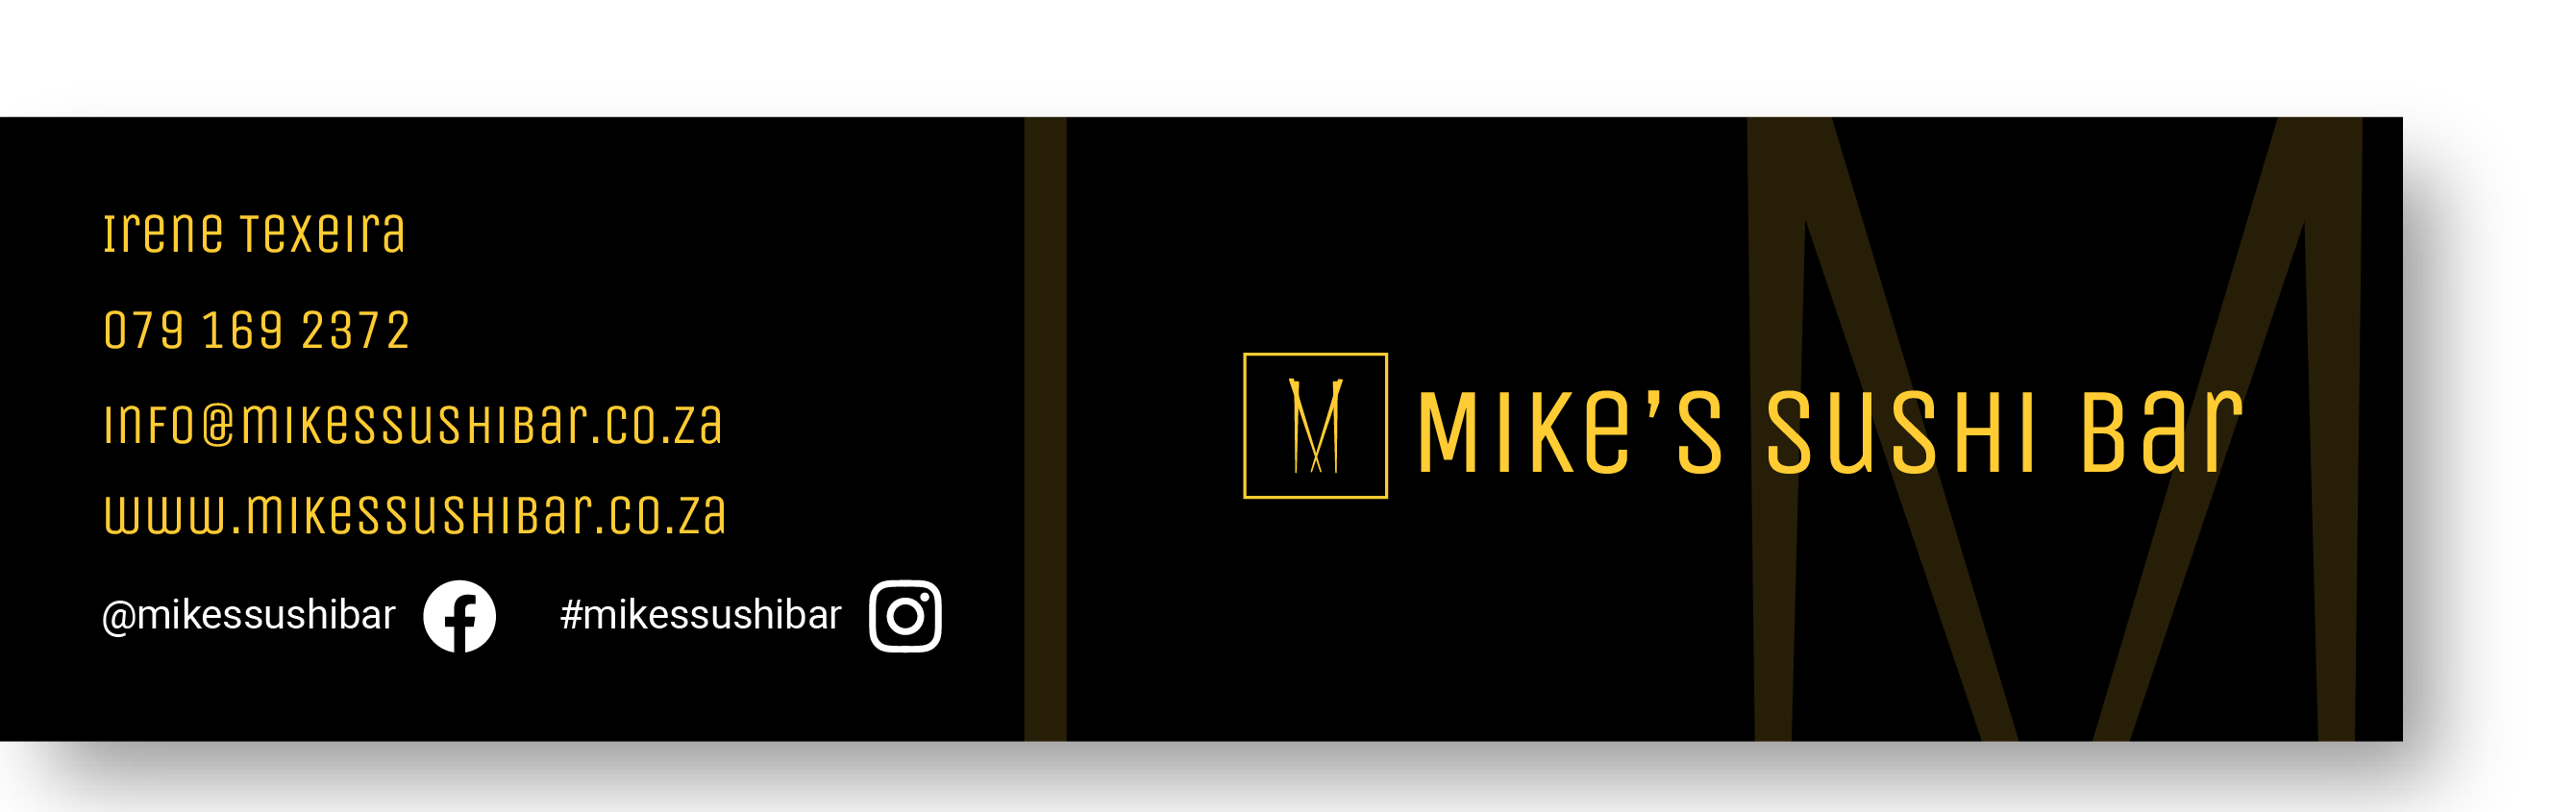 Email signature for Mike's Sushi Bar